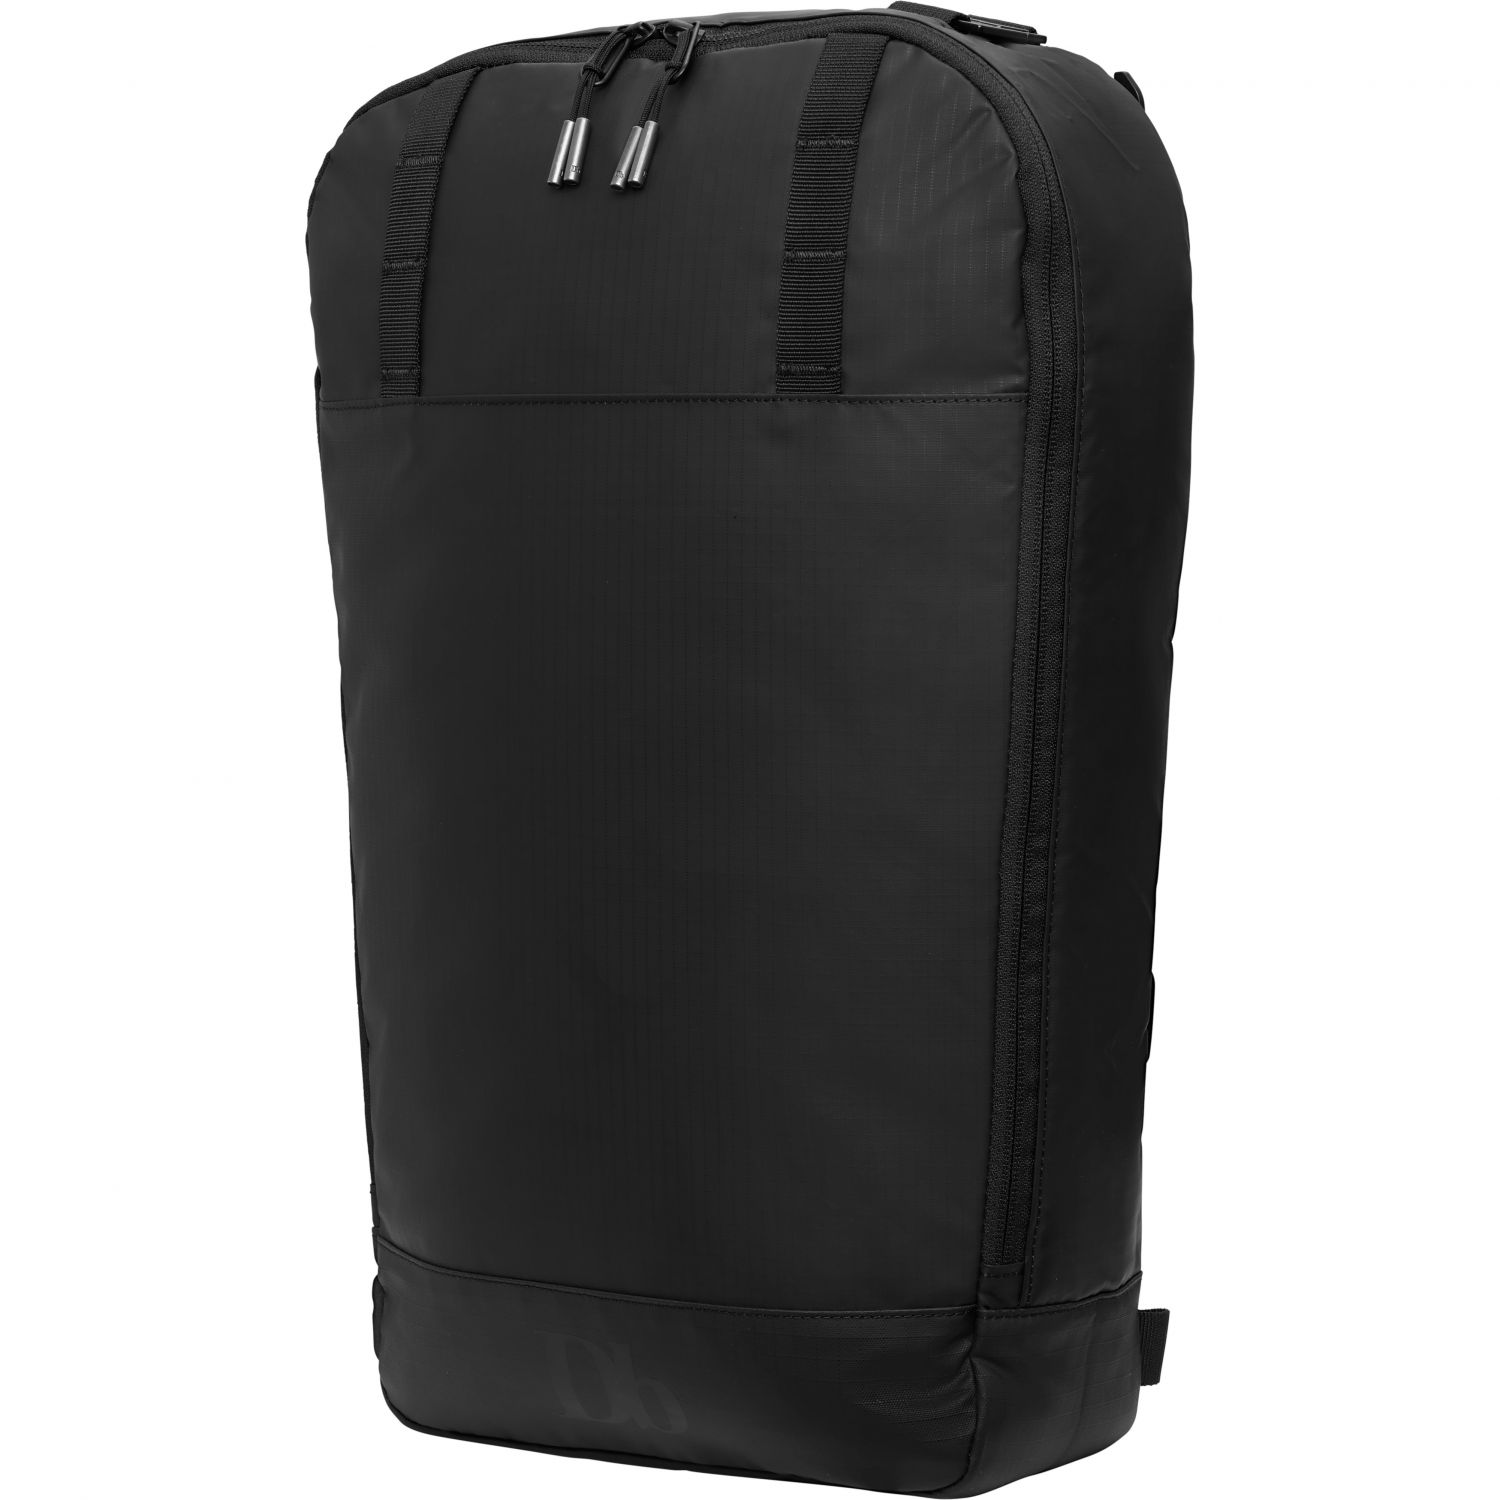 Db Snow Backcountry Multi-day Module, 18L, black out